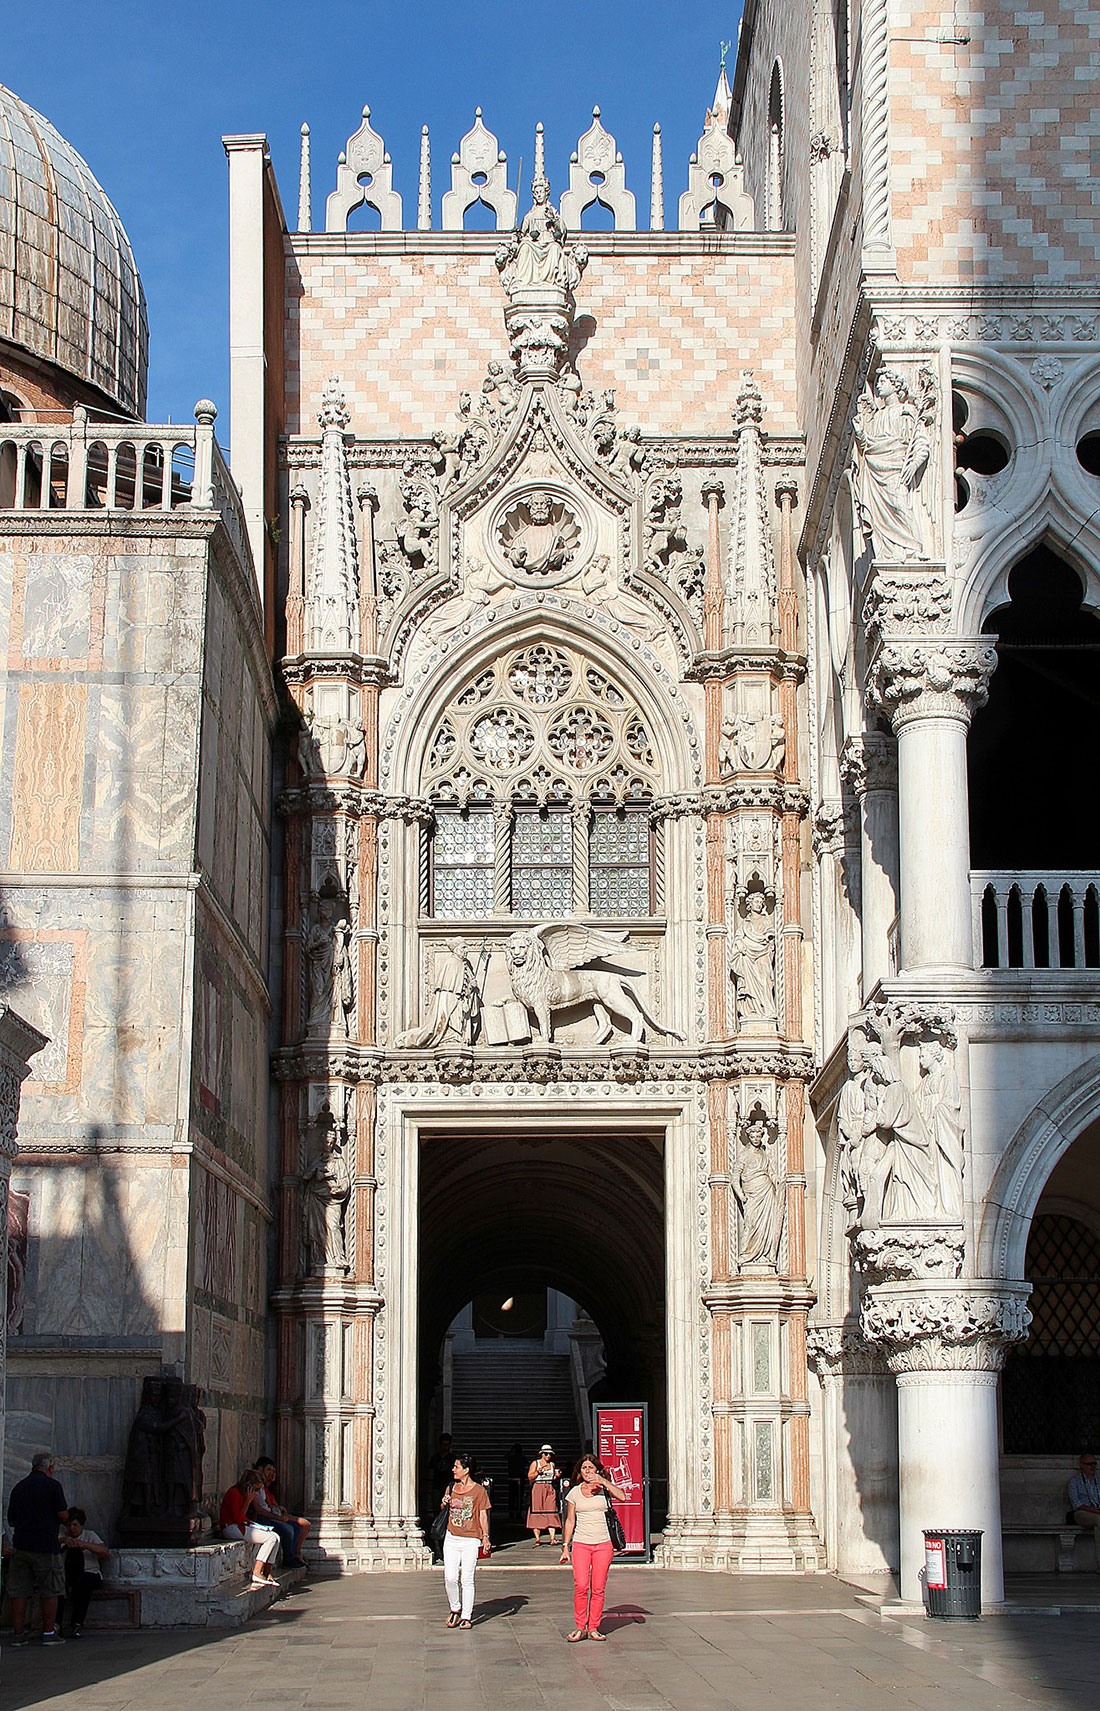 The Doge's Palace (Palazzo Ducale) in Venice